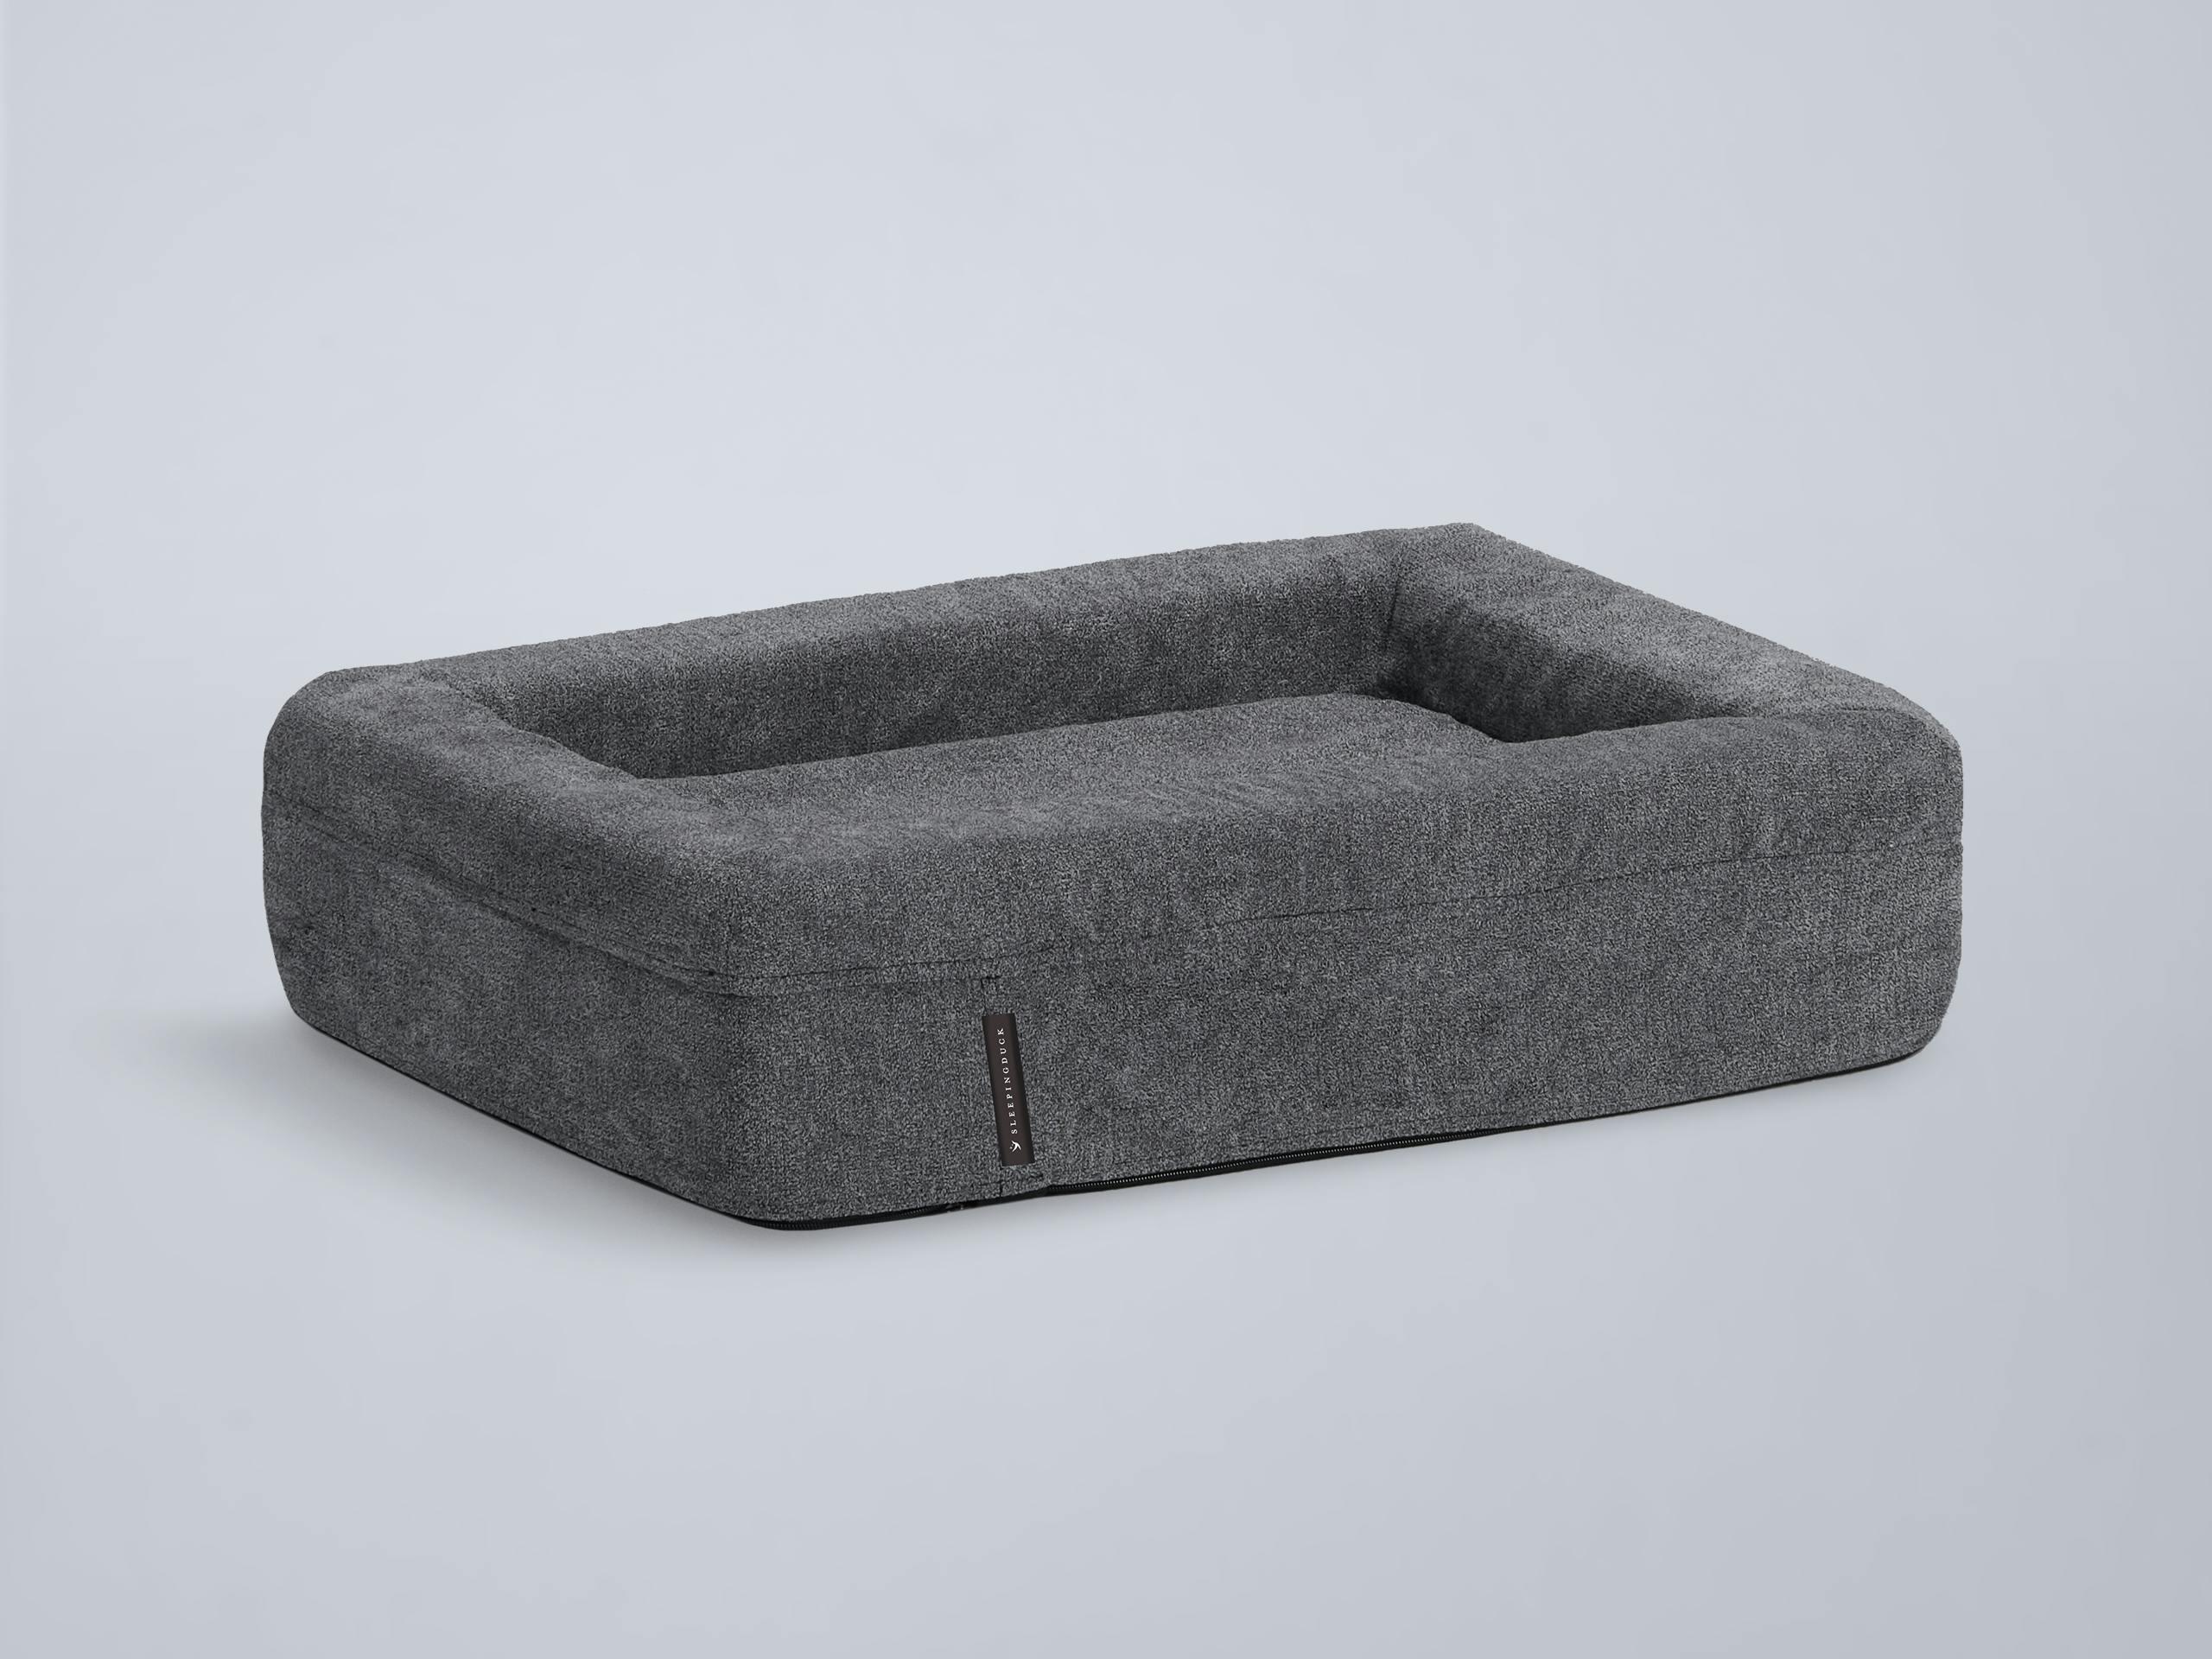 The Sleeping Duck Dog Bed from the side.